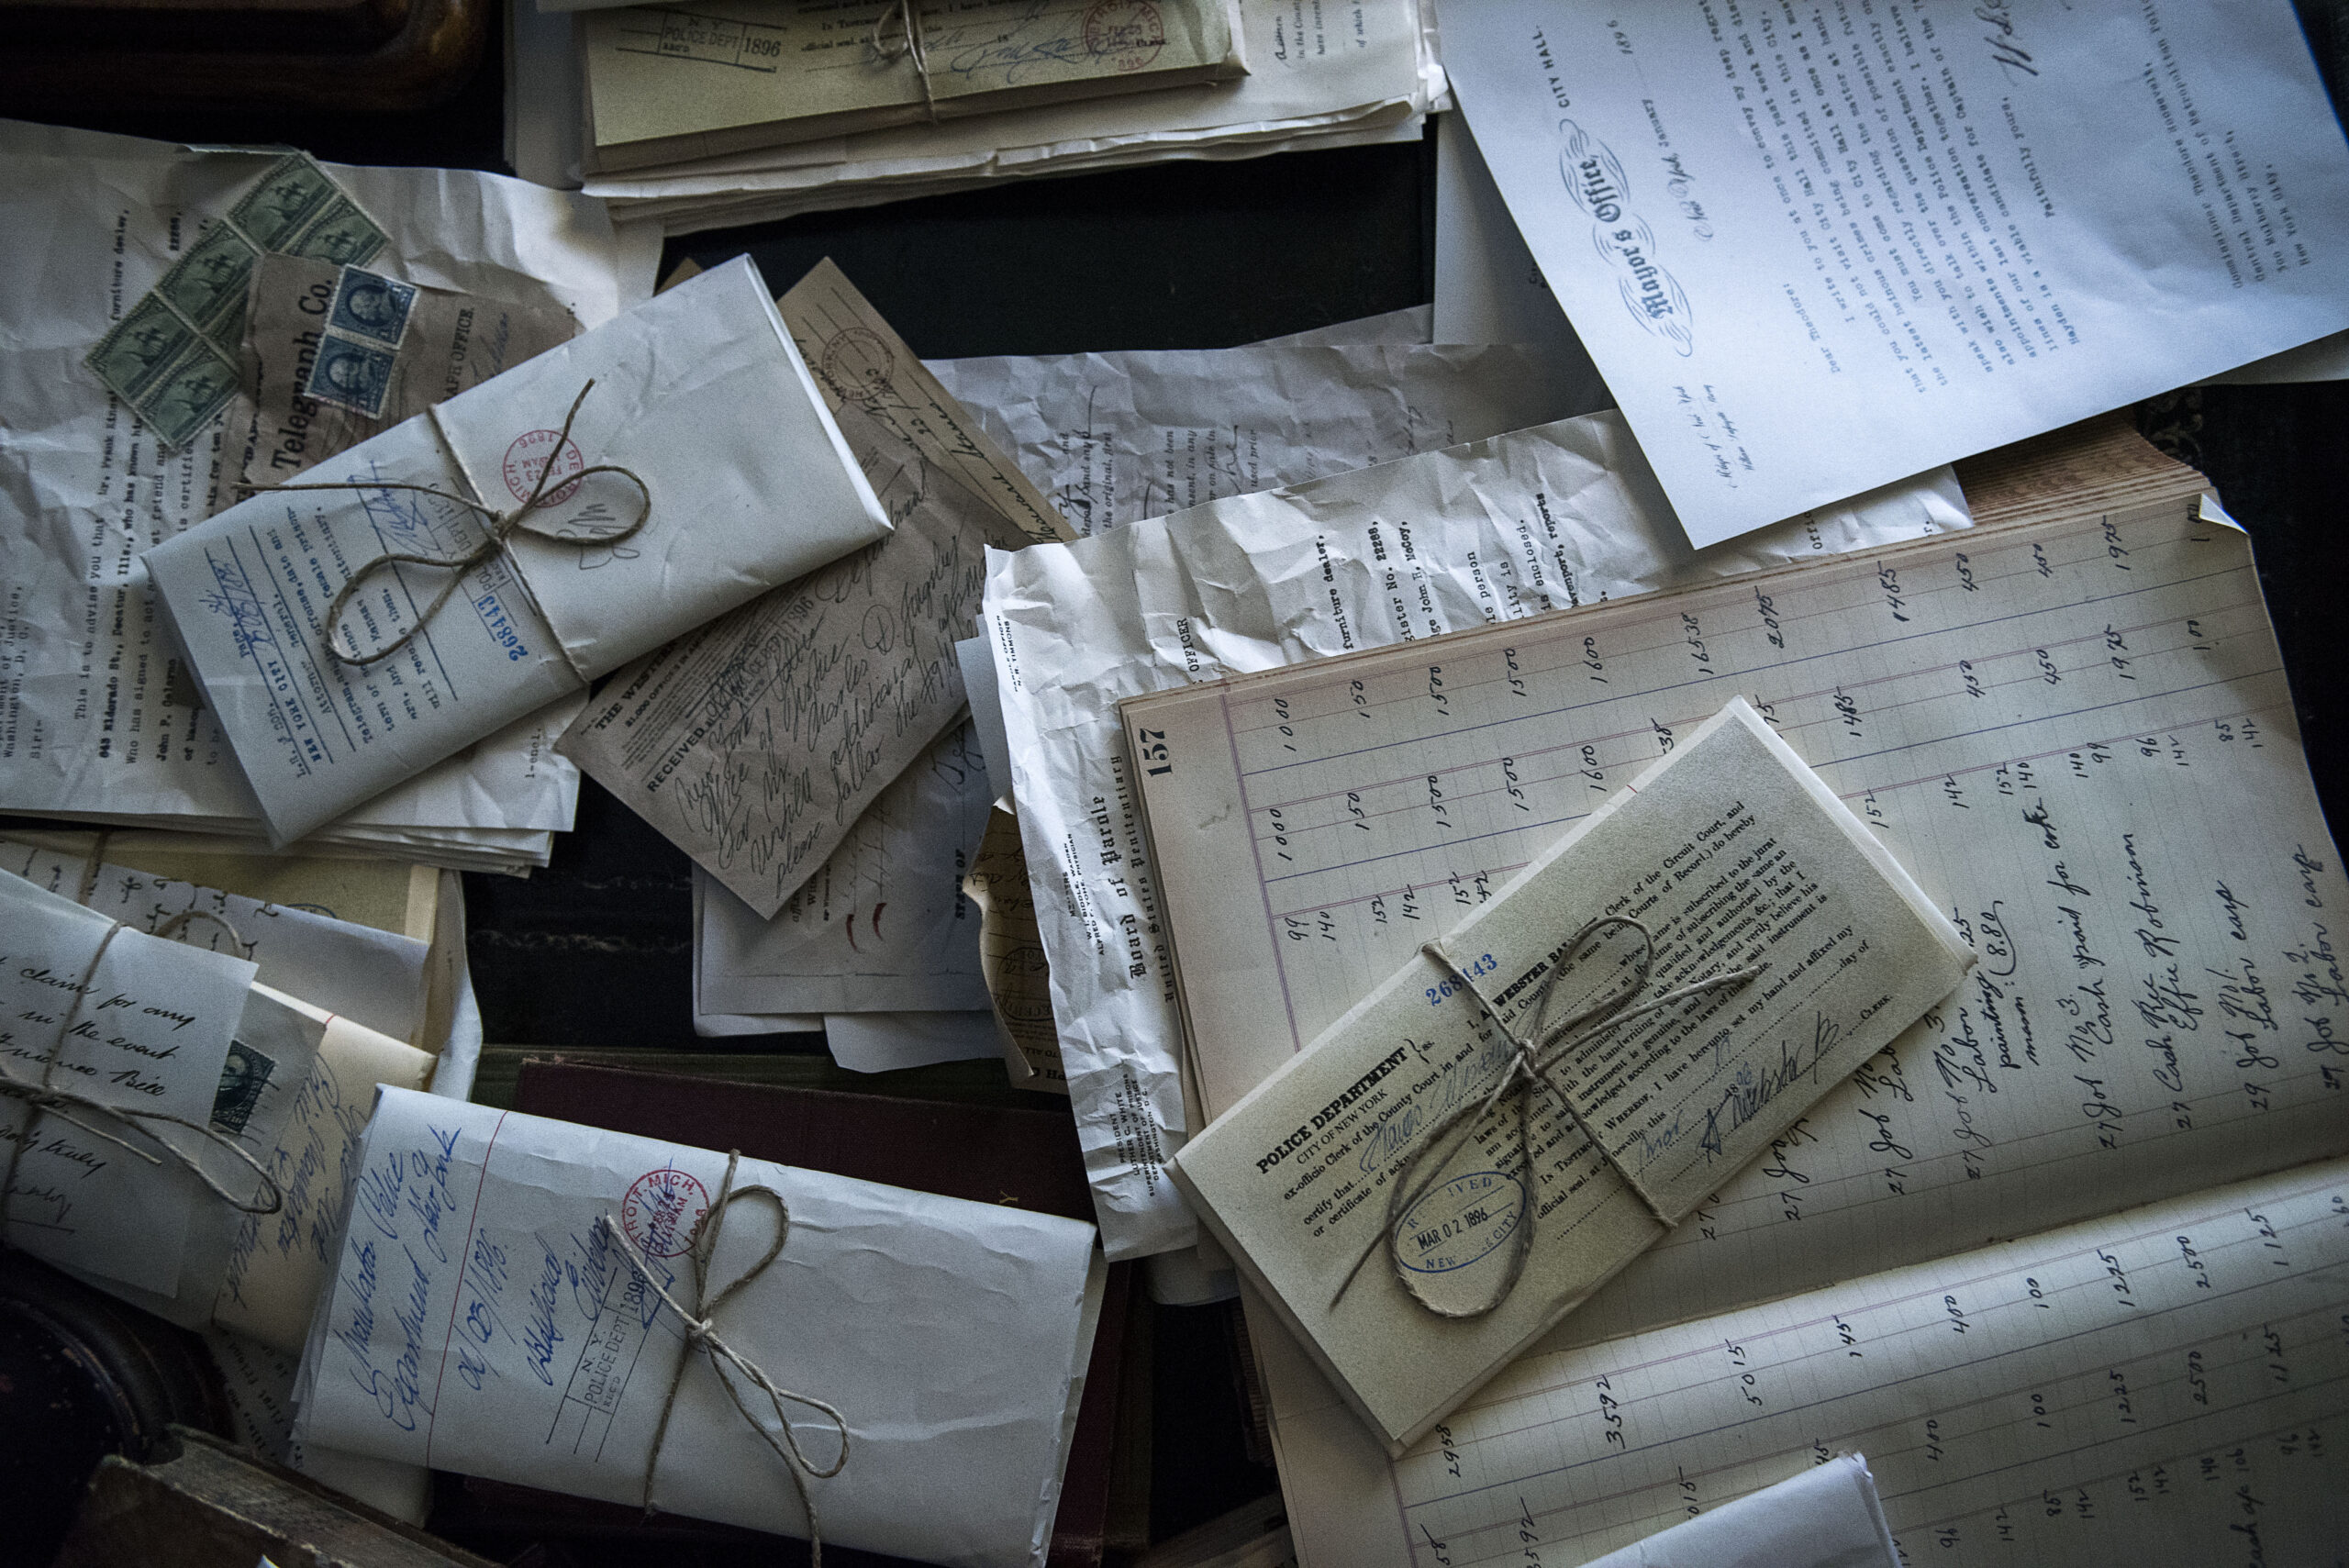 Papers and pages and parcels spread on a table